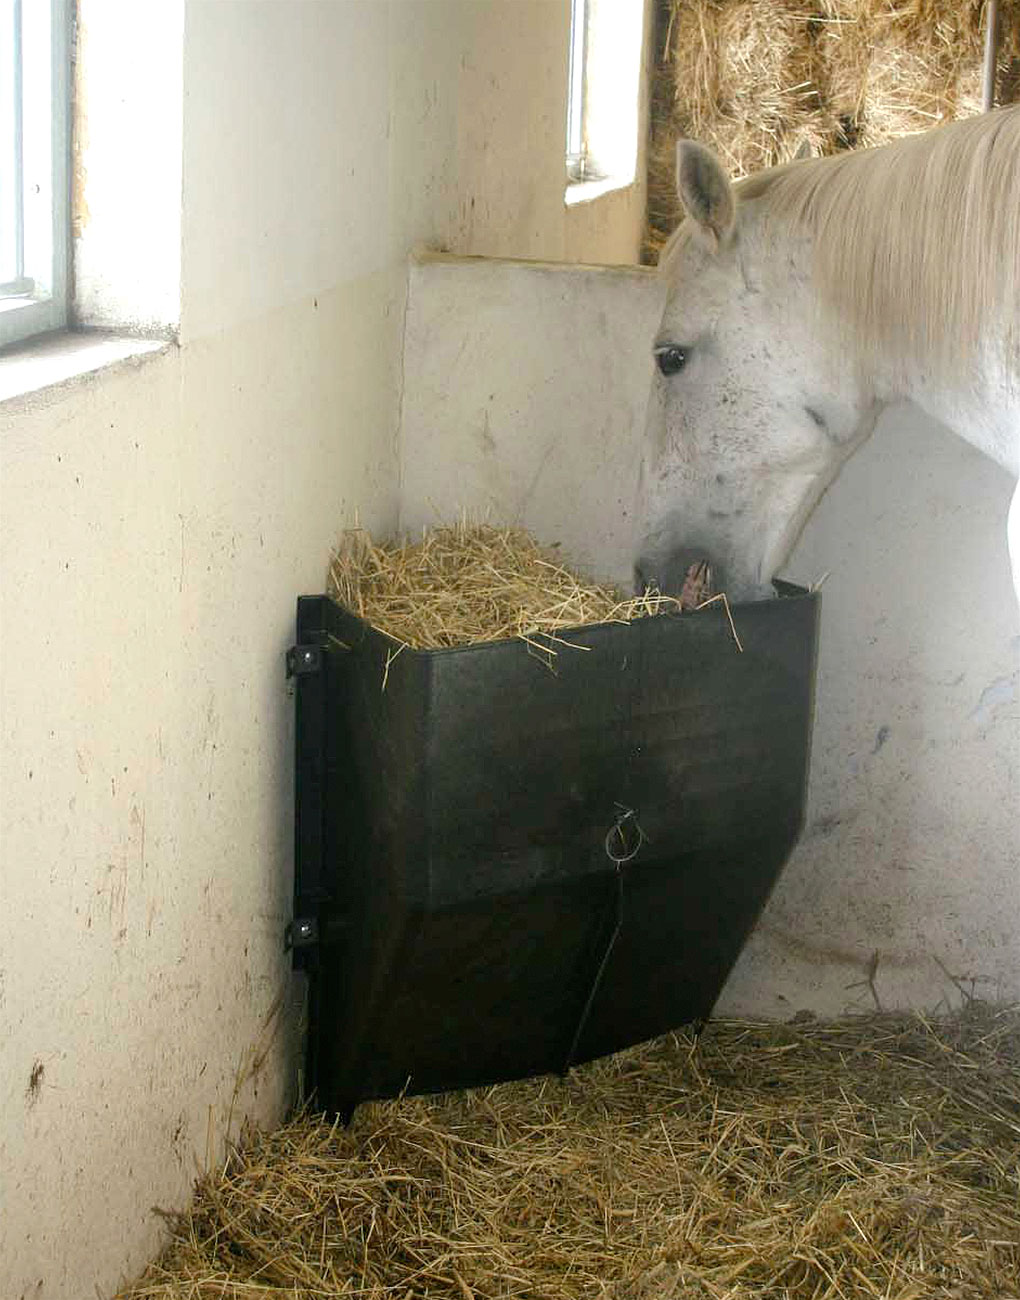 Horse eating from straw